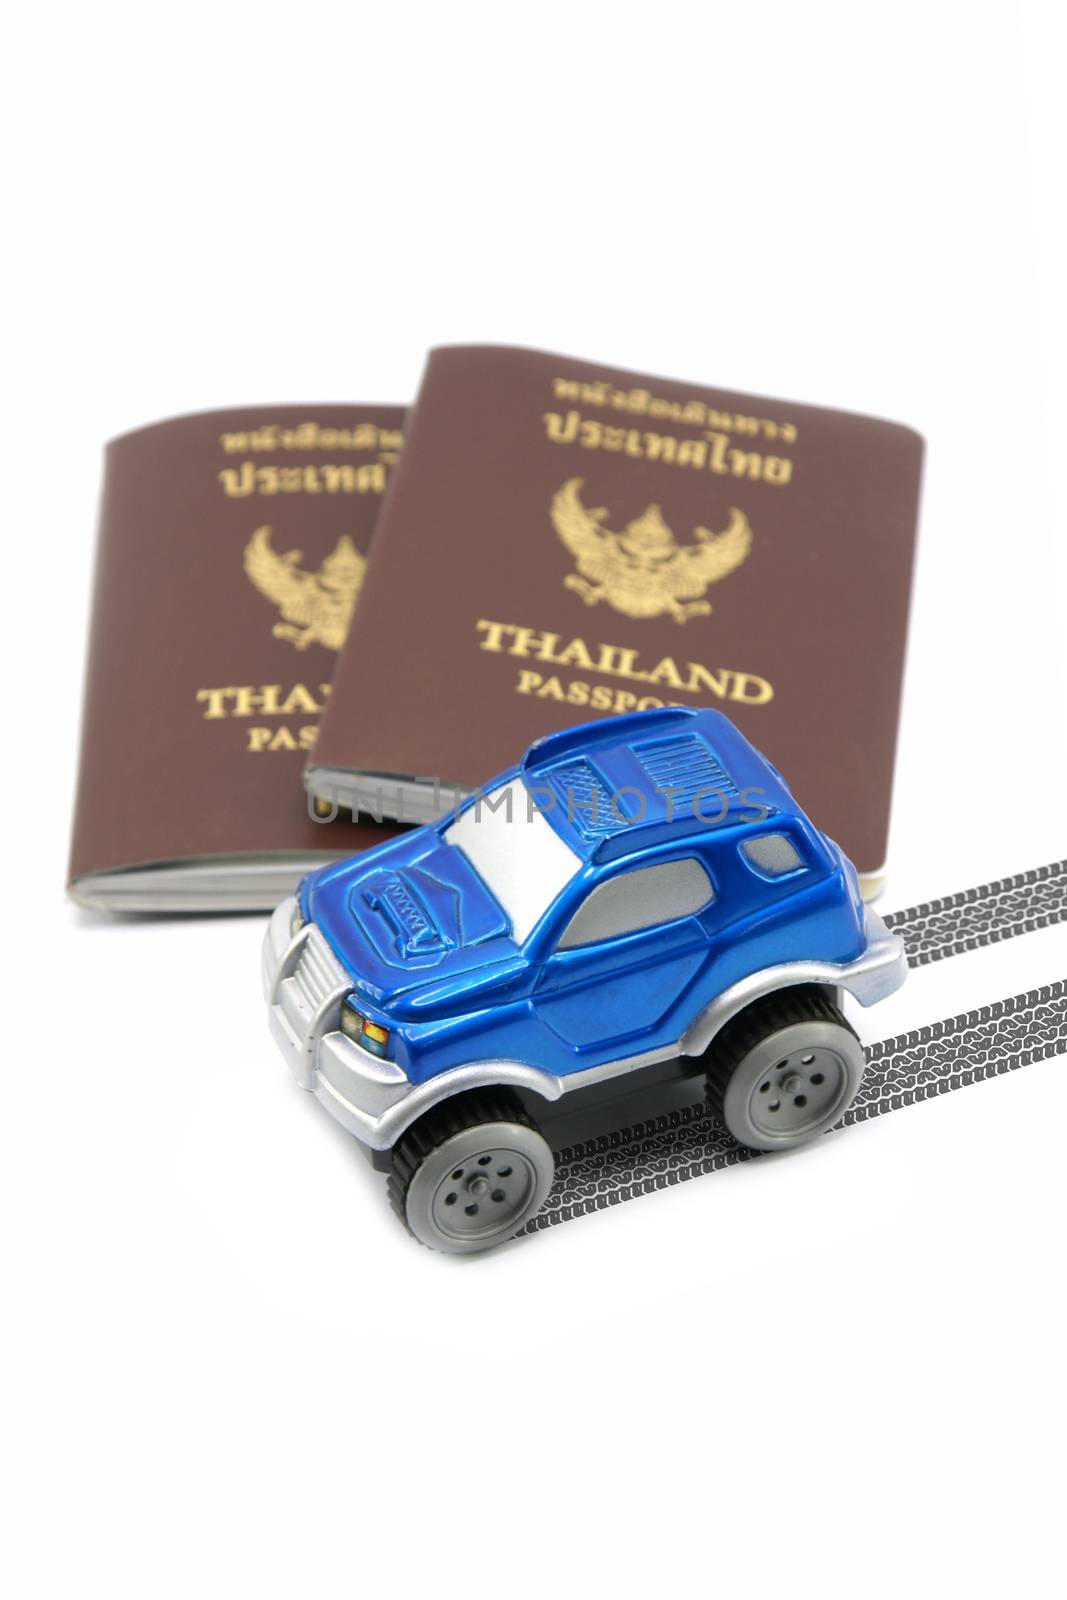 Thailand passport and blue 4wd car for travel concept by mranucha